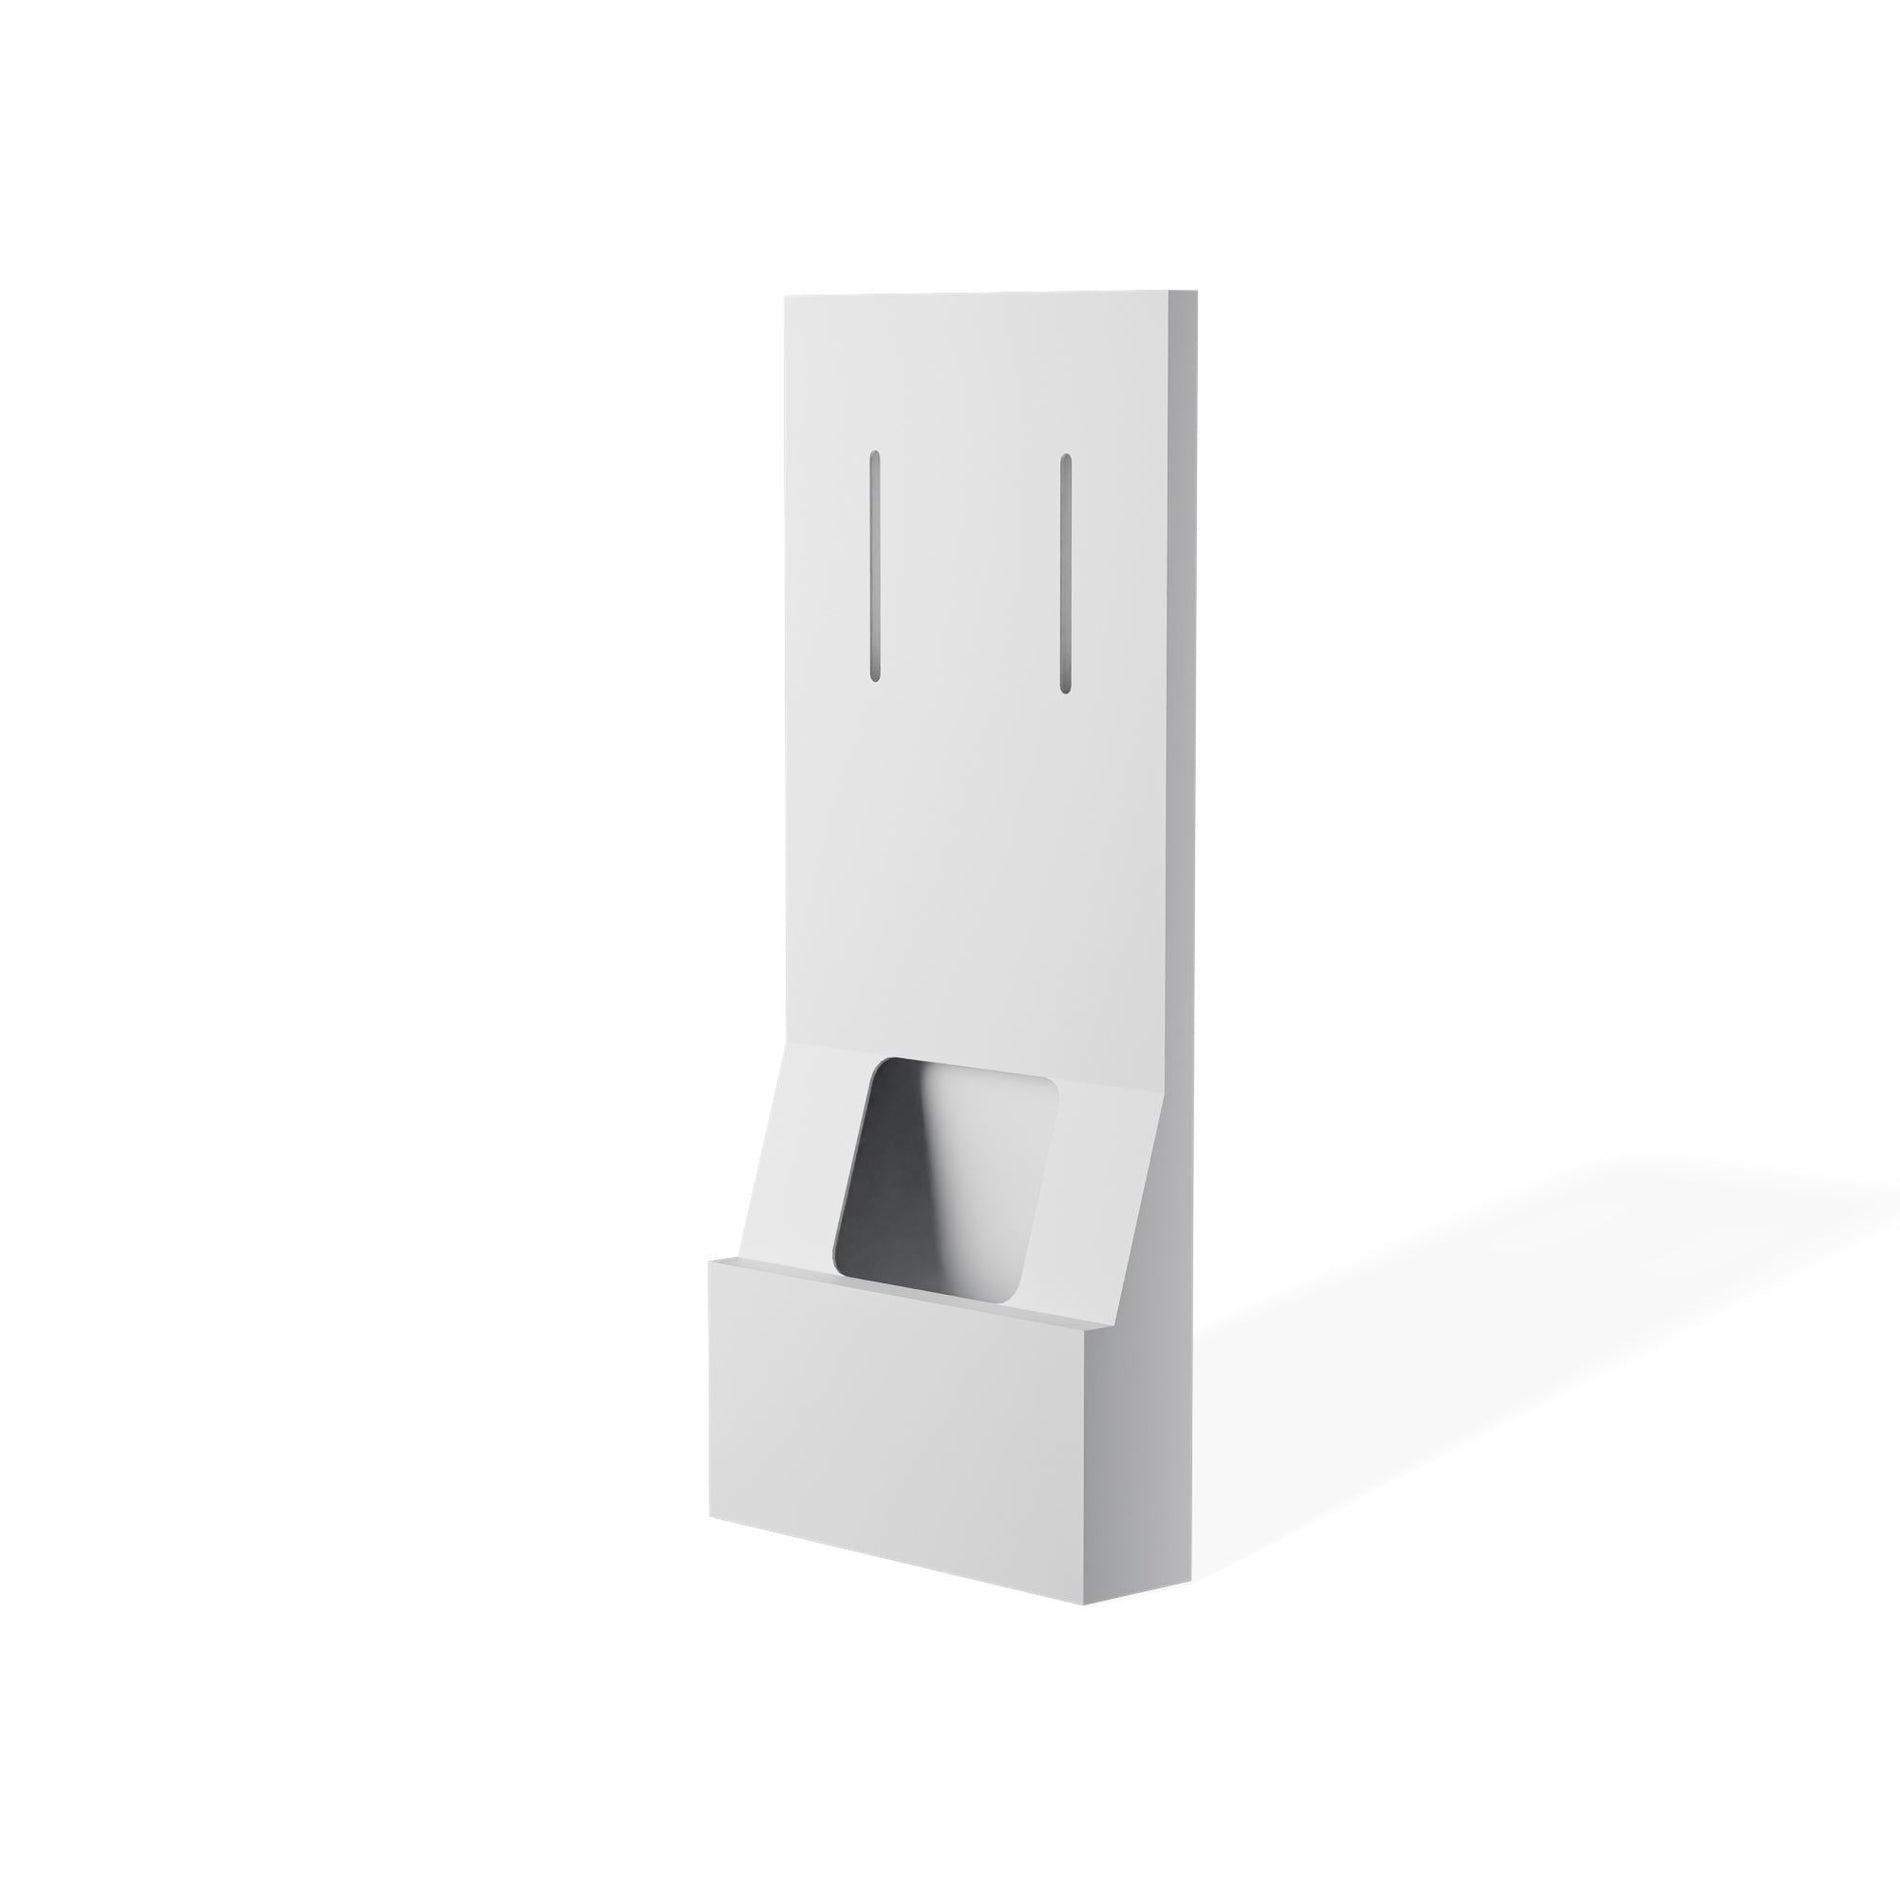 Quell Furniture of Meeting Booth - 6 PersonMonitor stand